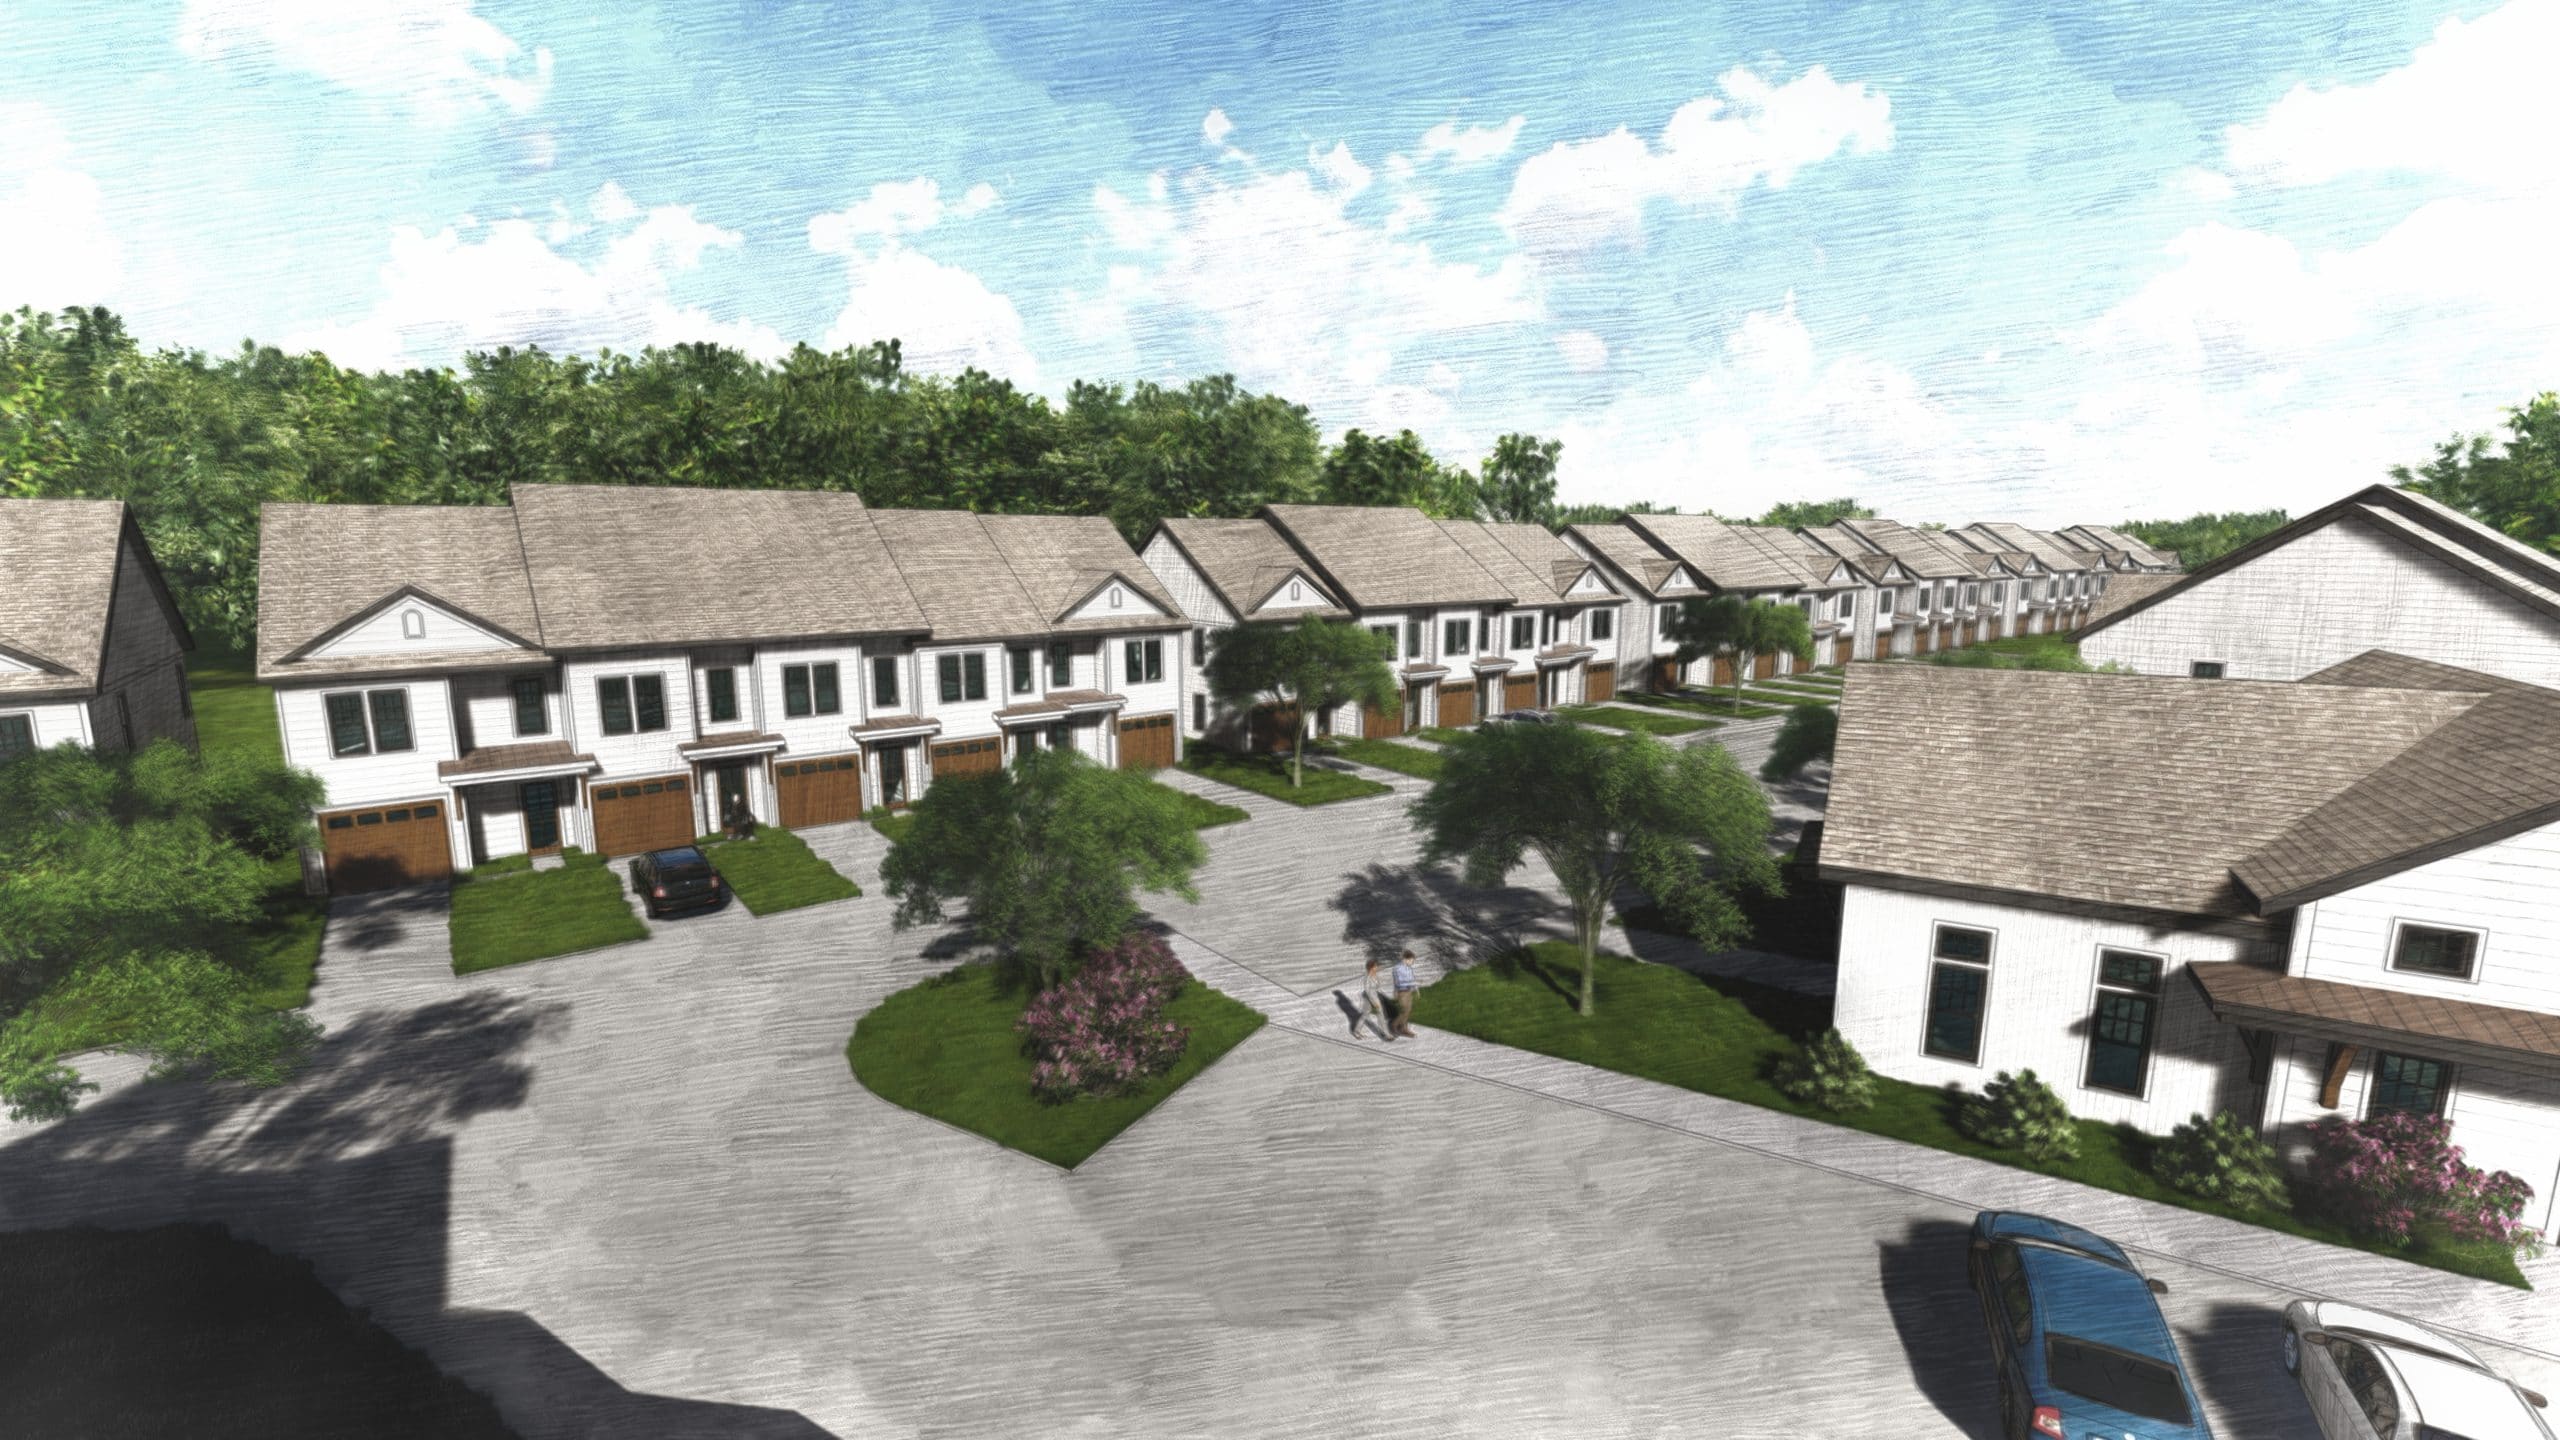 2021.07.31 - HICKORY TOWNHOMES - RENDERING 2